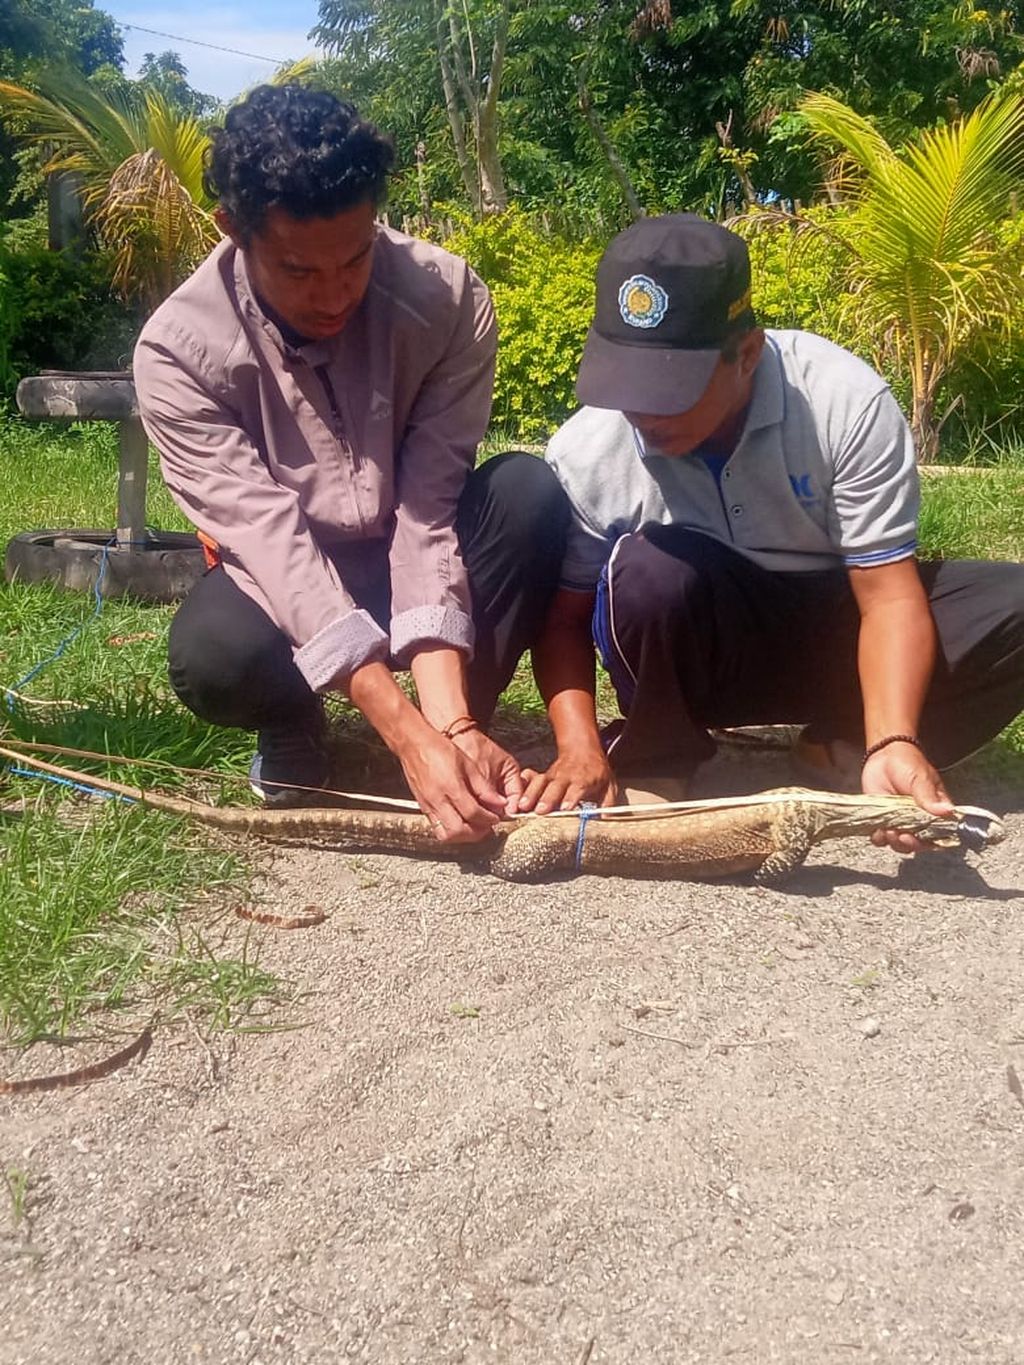 Arsyad (right) is measuring the length of a rugu or dragon.